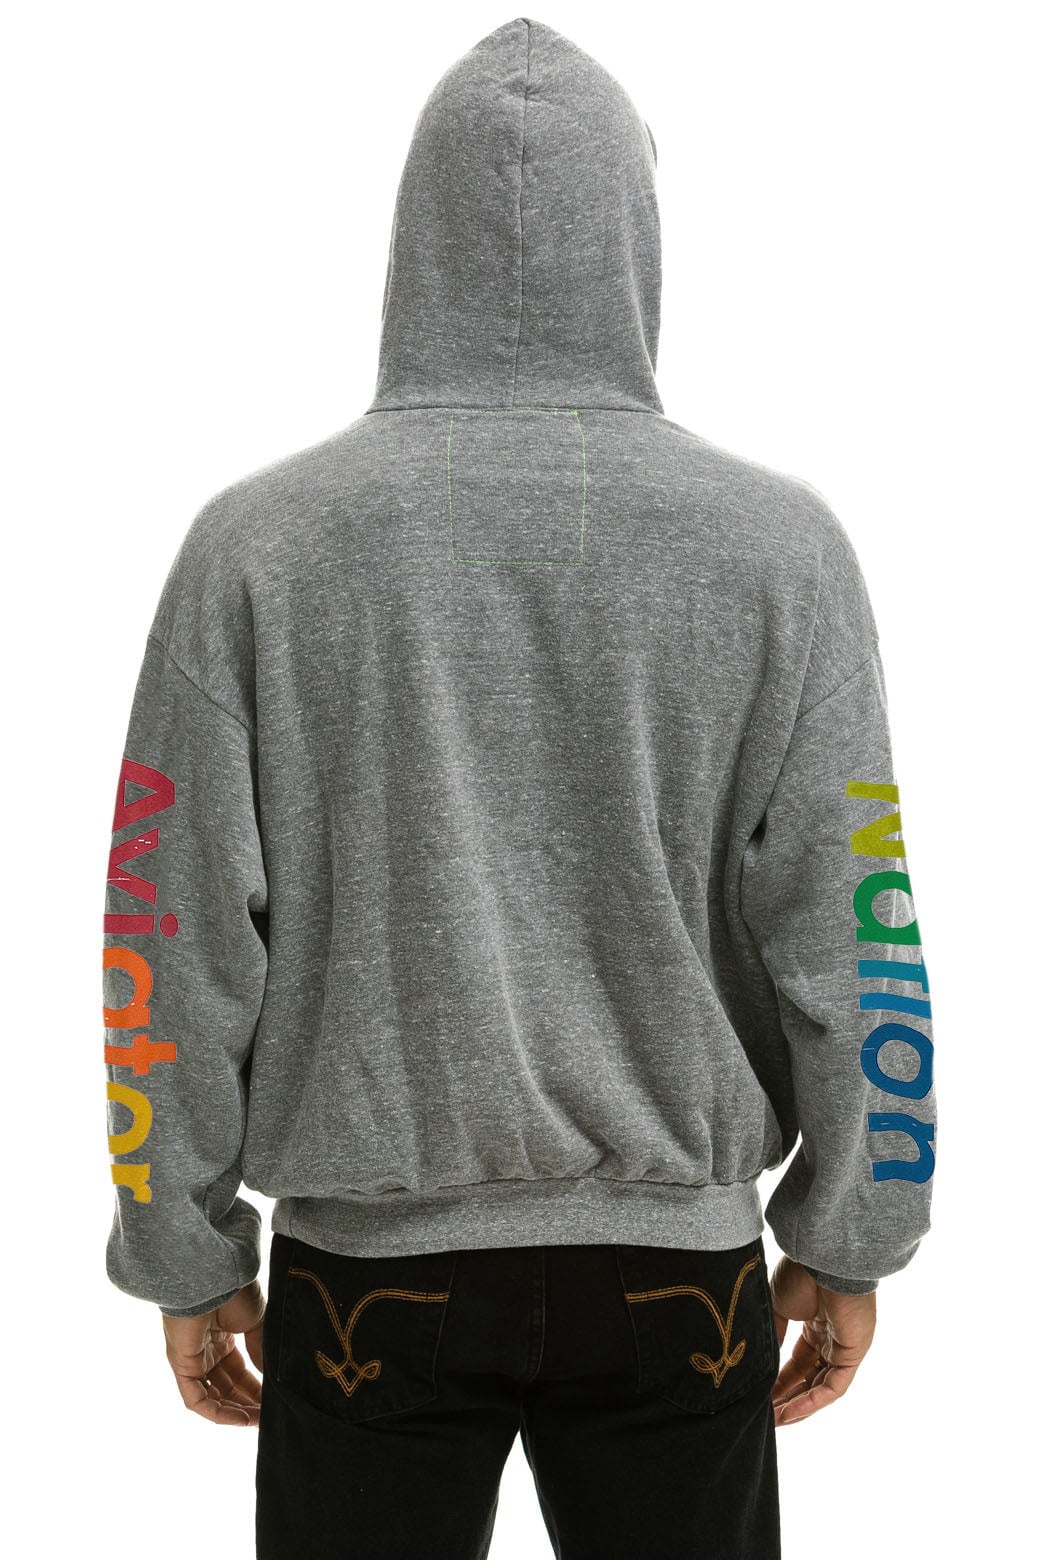 AVIATOR NATION VAIL RELAXED PULLOVER HOODIE - HEATHER GREY Hoodie Aviator Nation 